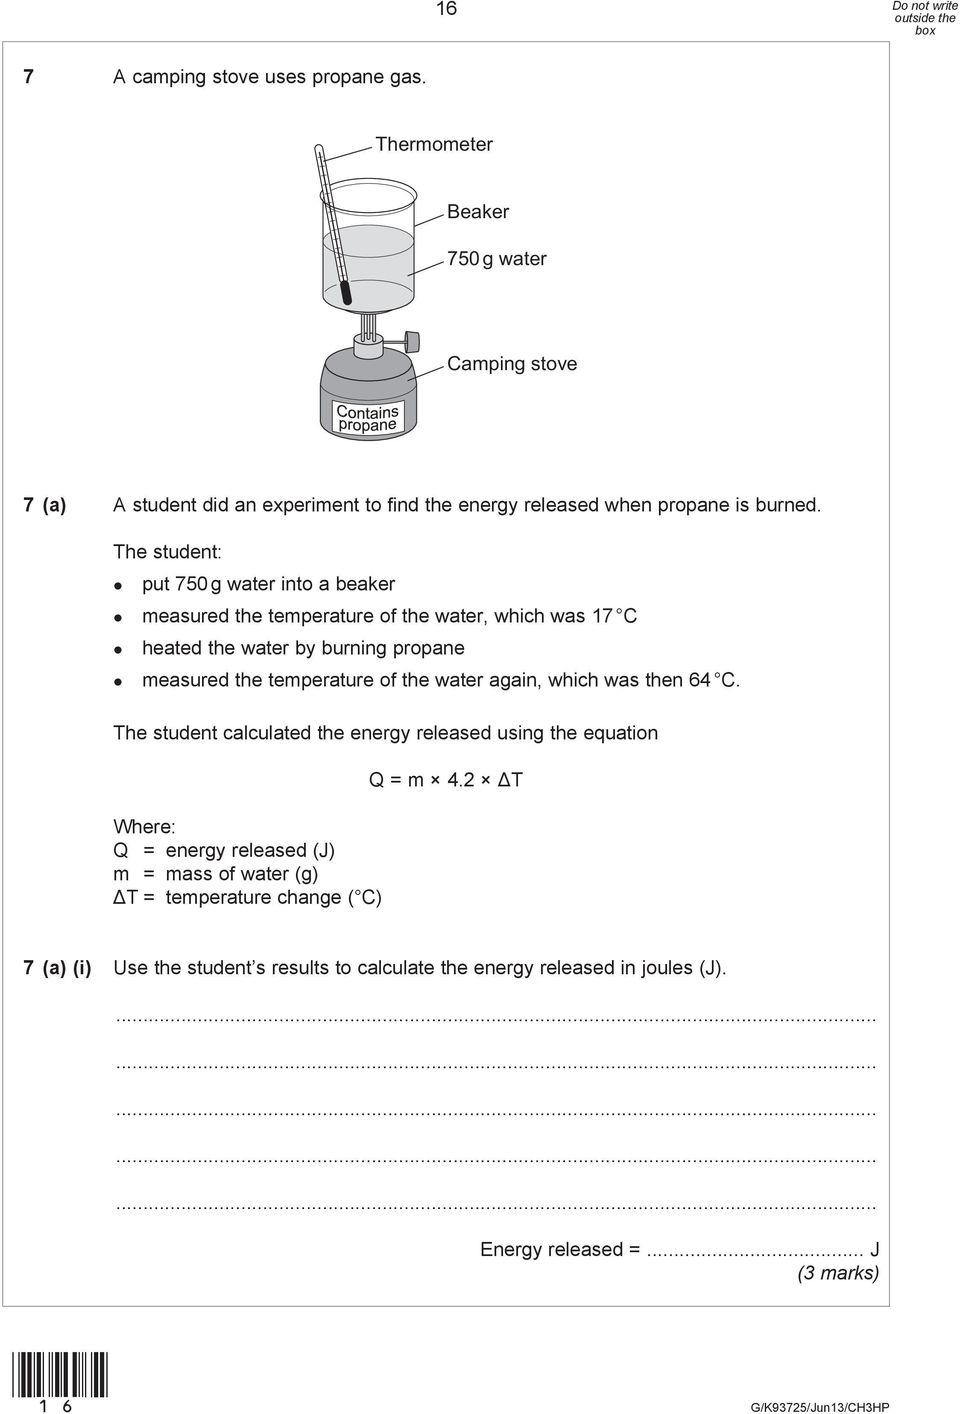 The student: put 750 g water into a beaker measured the temperature of the water, which was 17 C heated the water by burning propane measured the temperature of